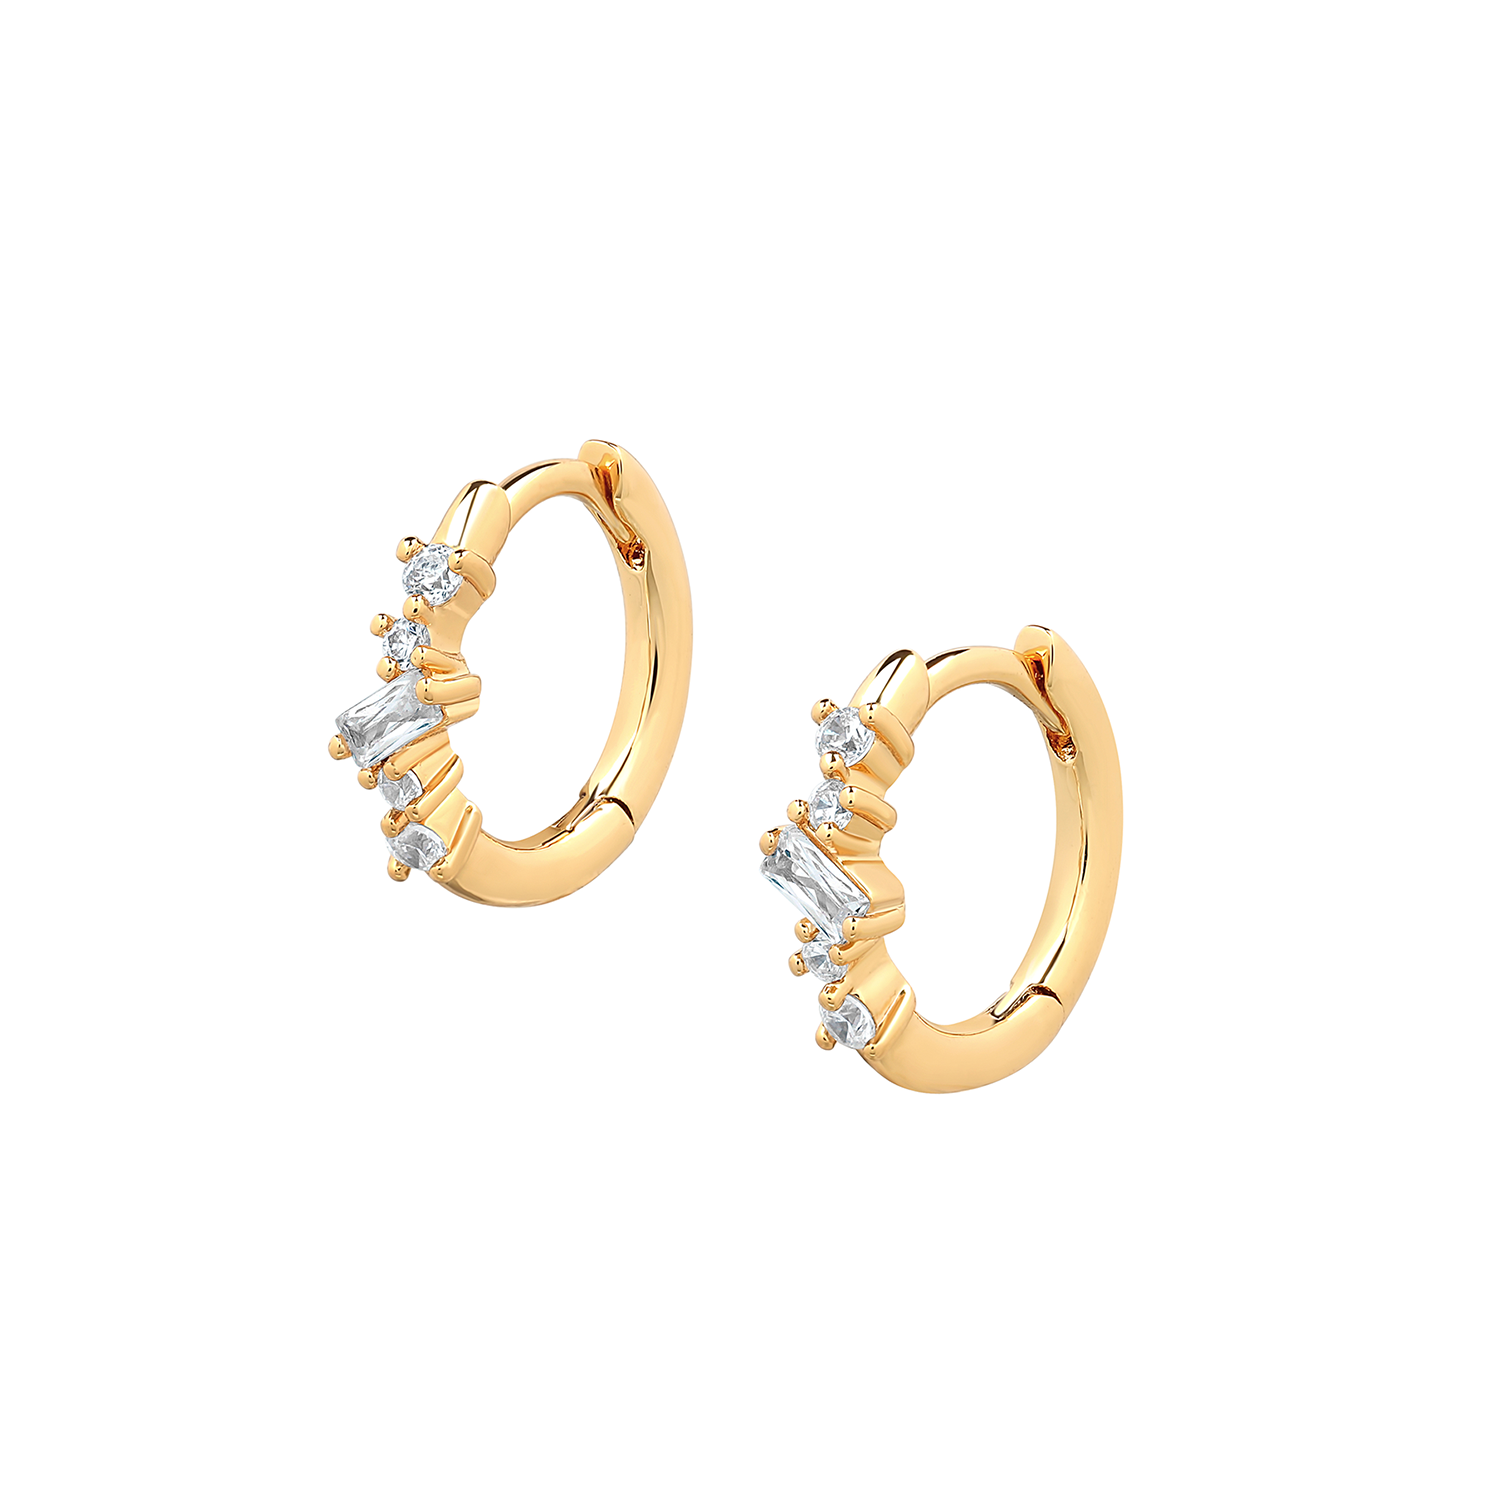 Elegant and statement earrings. Gold huggies set with cubic zirconia stones.